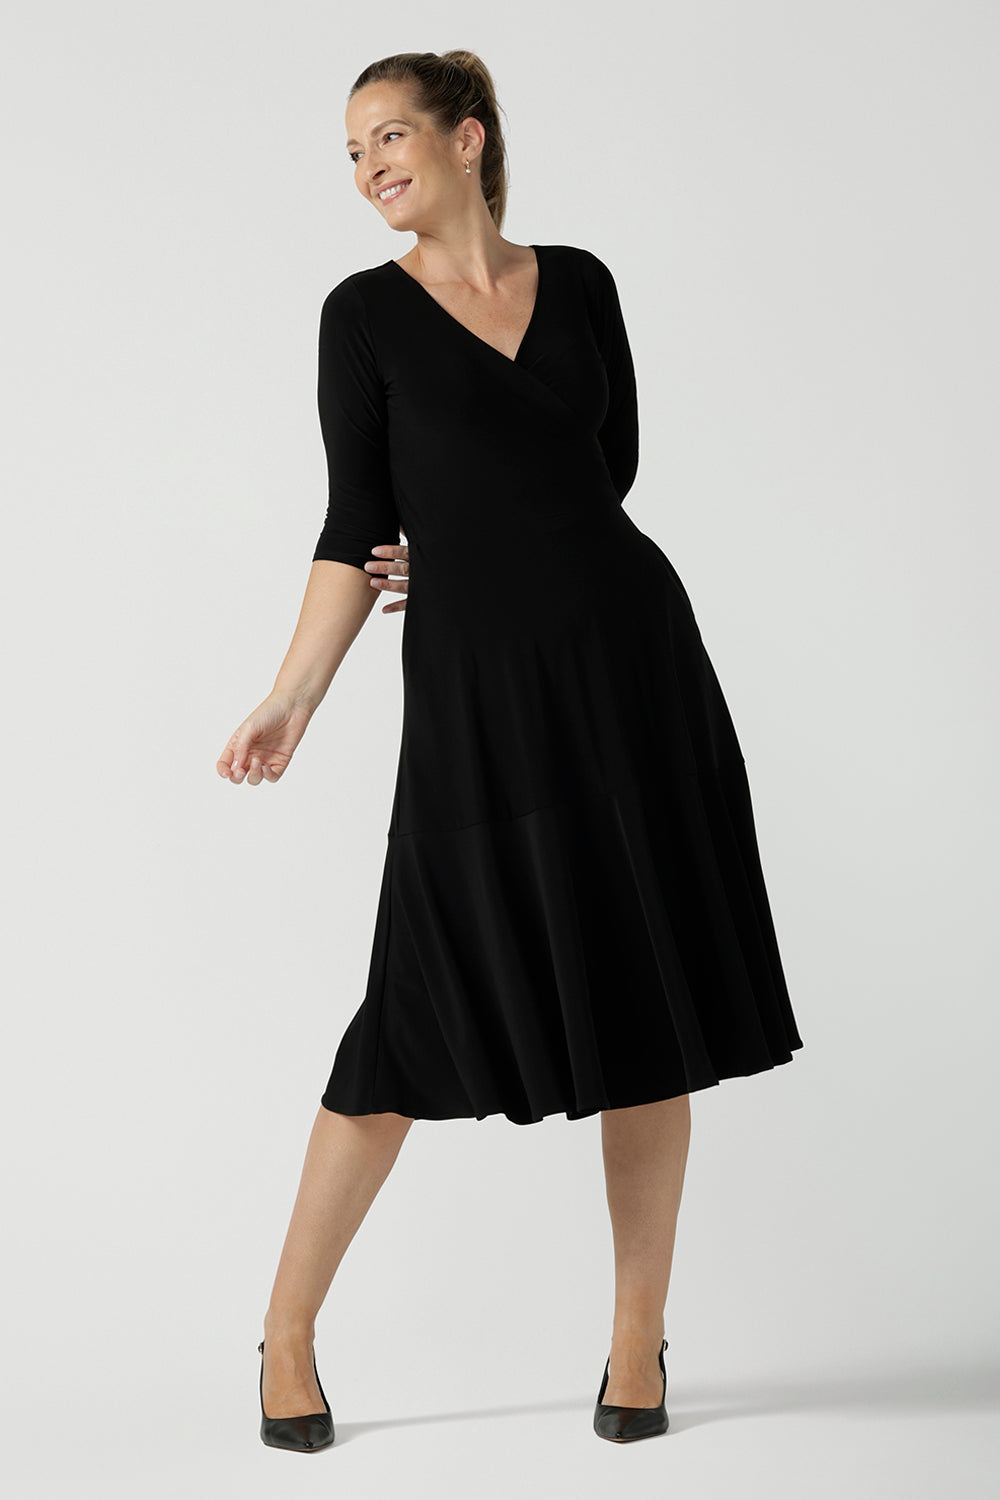 Size 10 woman wears the Bettina dress in black soft jersey. Wrap front reversible design with pockets and a tier. Styled back with black sling back shoes. Made in Australia for women size 8 - 24.